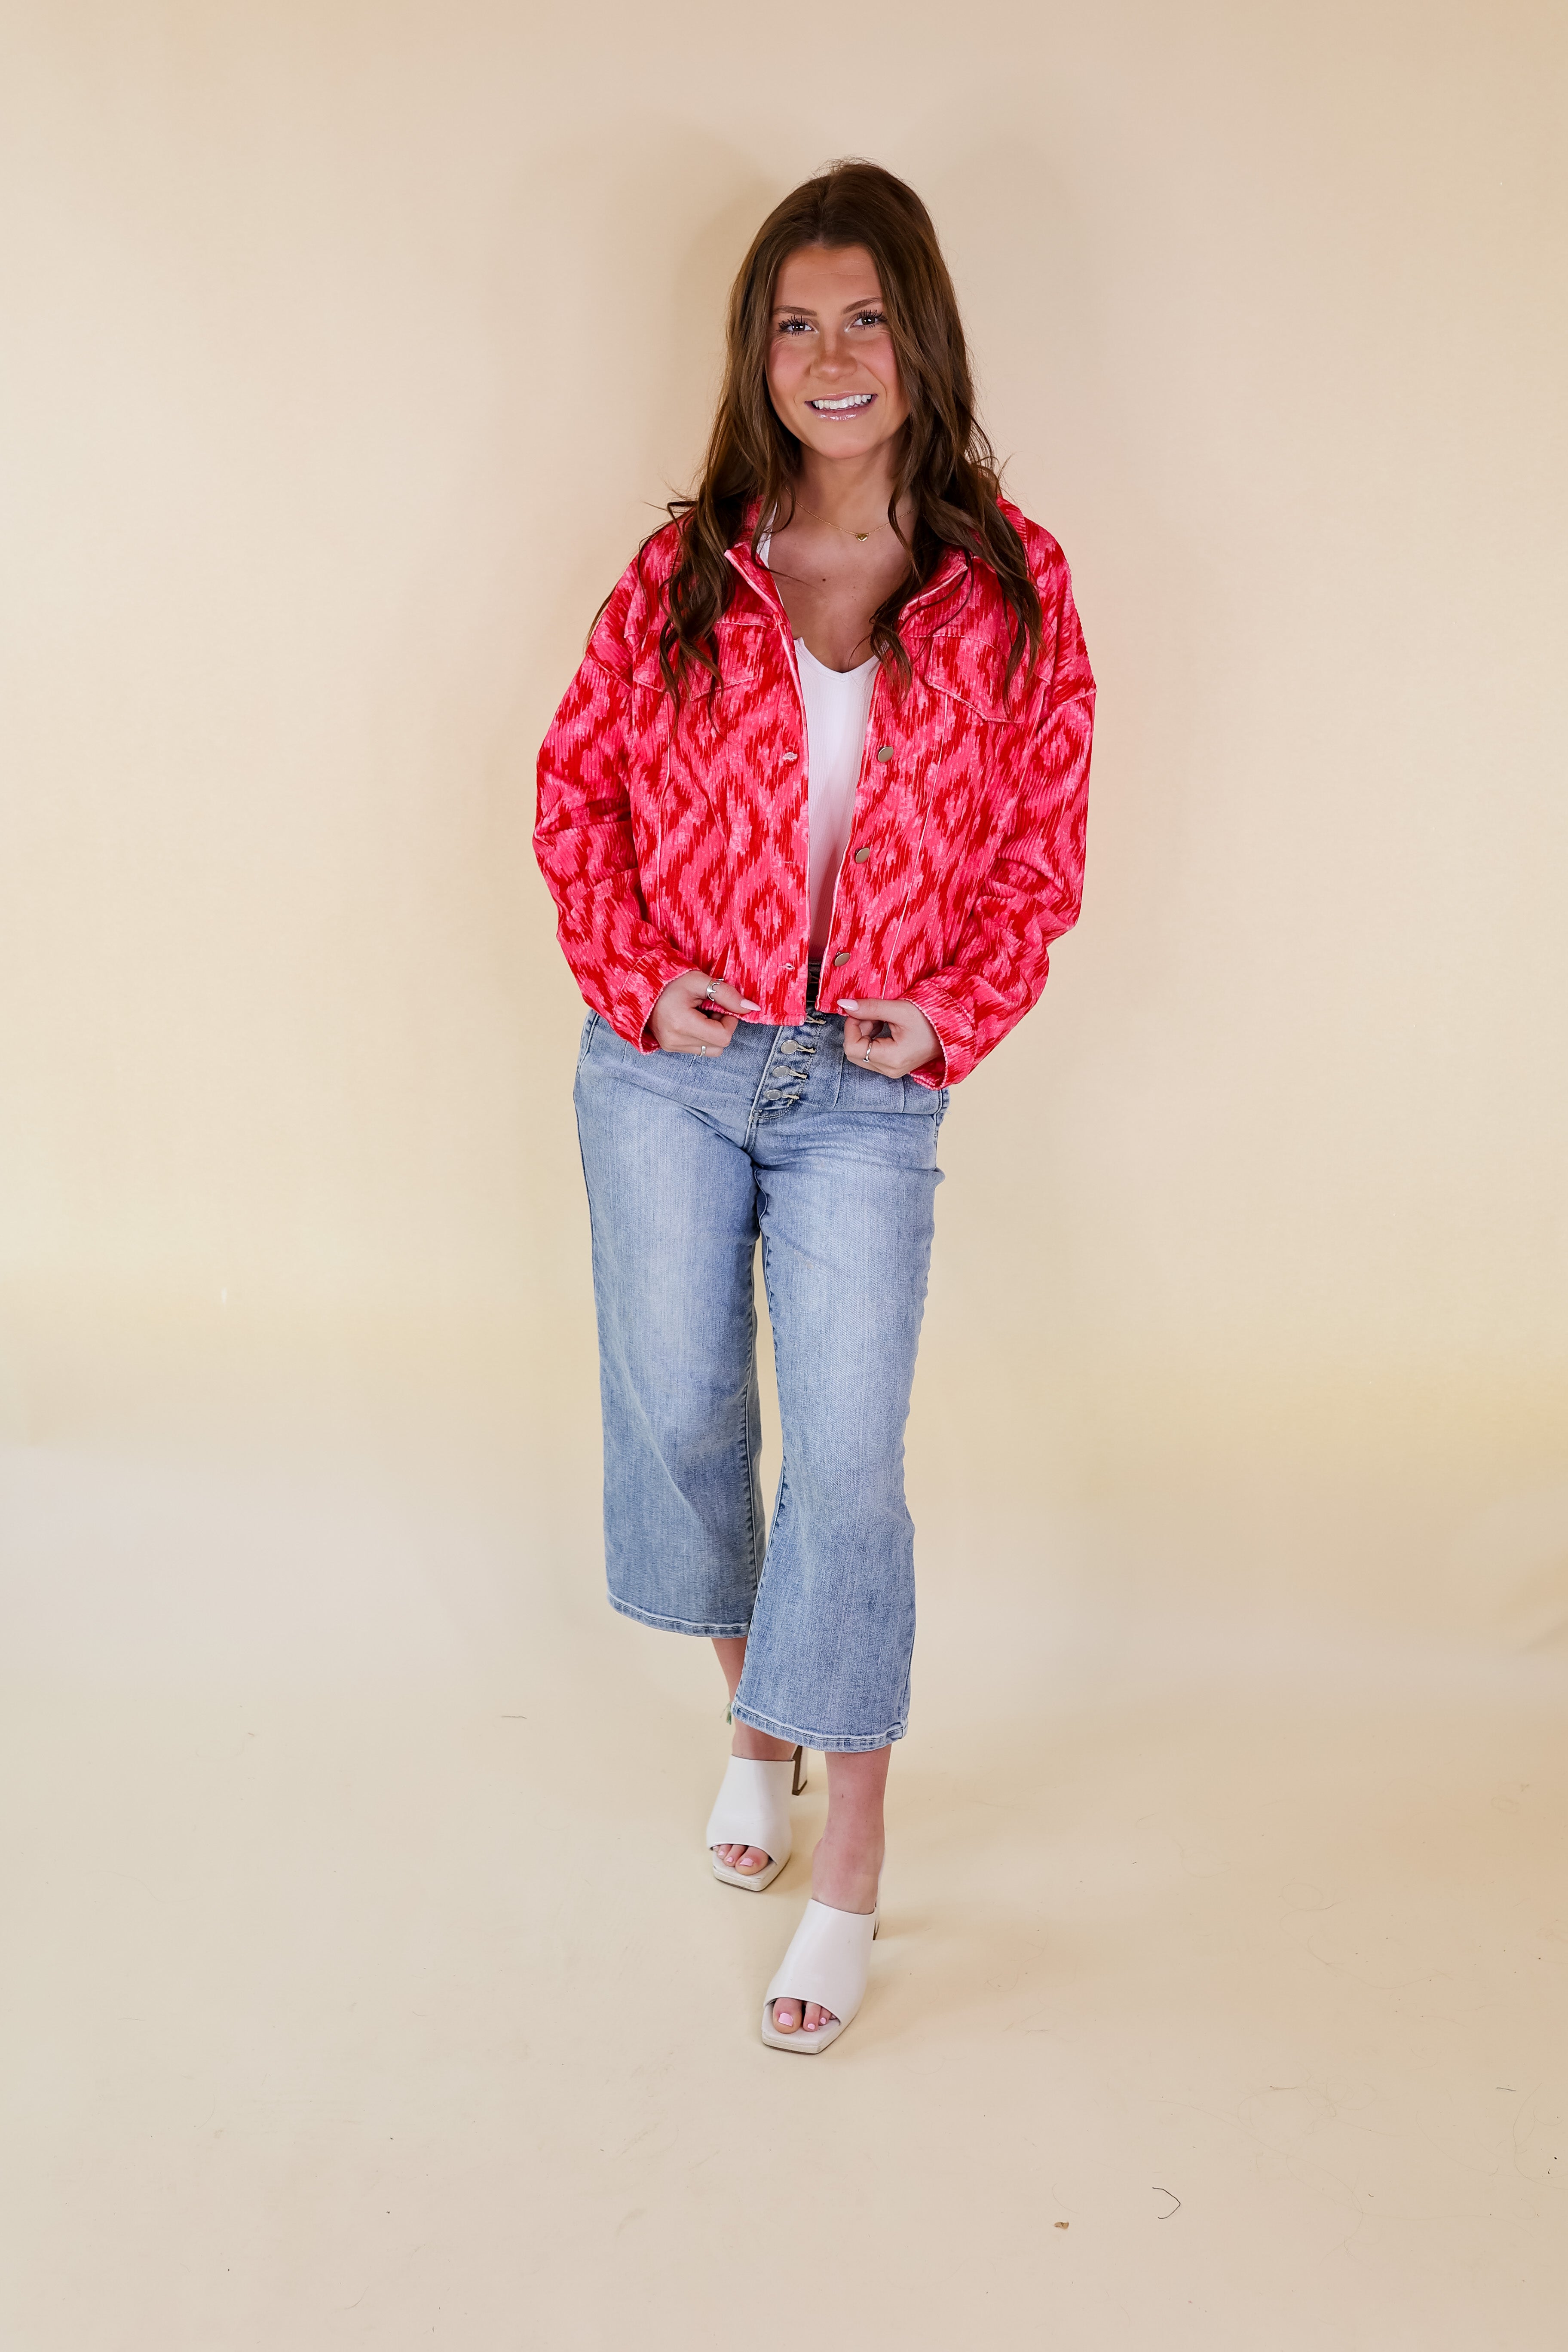 Stay Sweet Mosaic Print Corduroy Jacket with Crystal Fringe Back in Pink and Red - Giddy Up Glamour Boutique